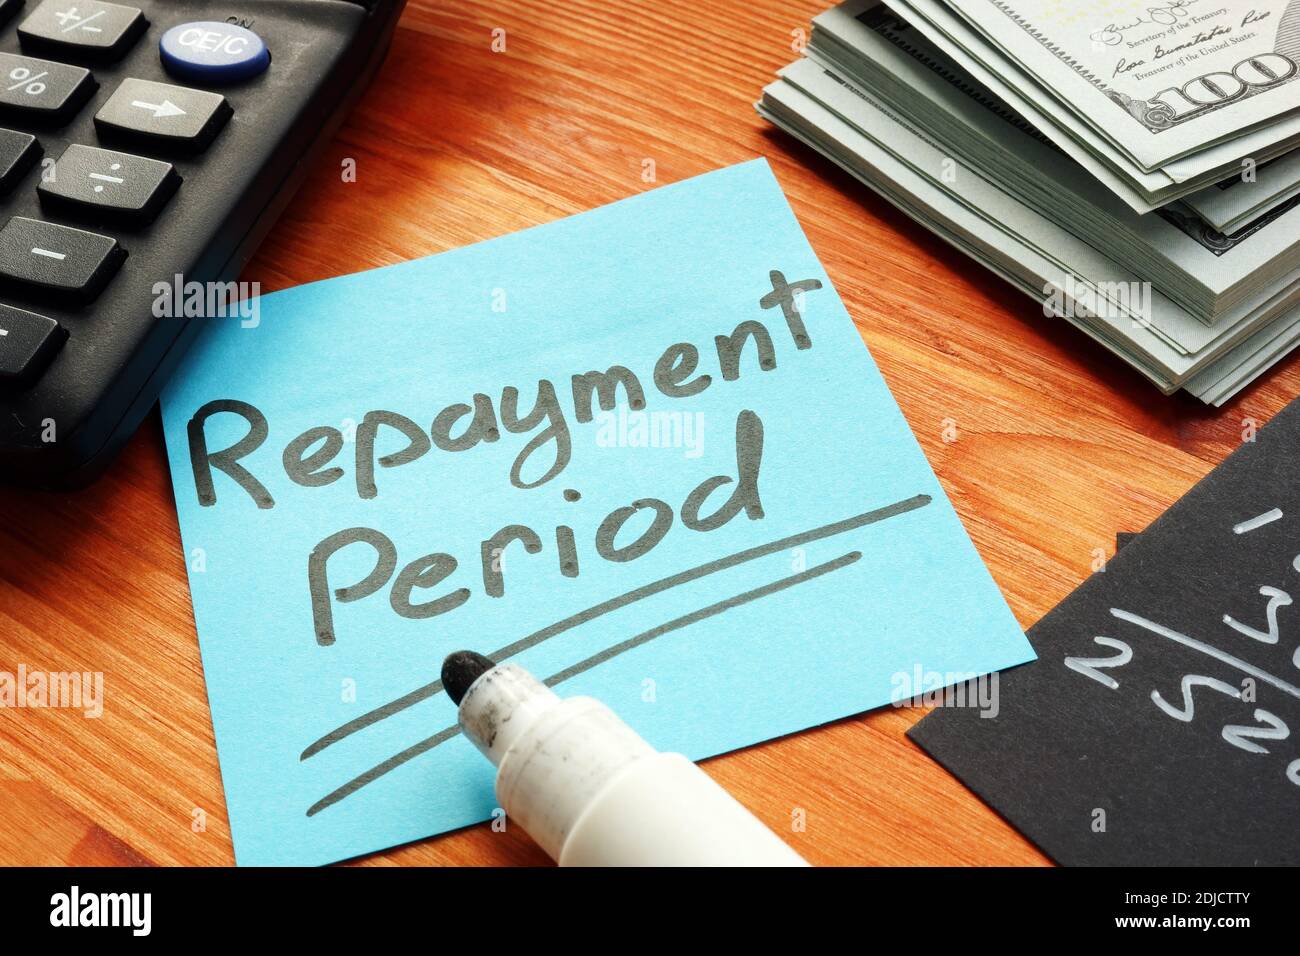 Repayment period memo on the piece of paper. Stock Photo